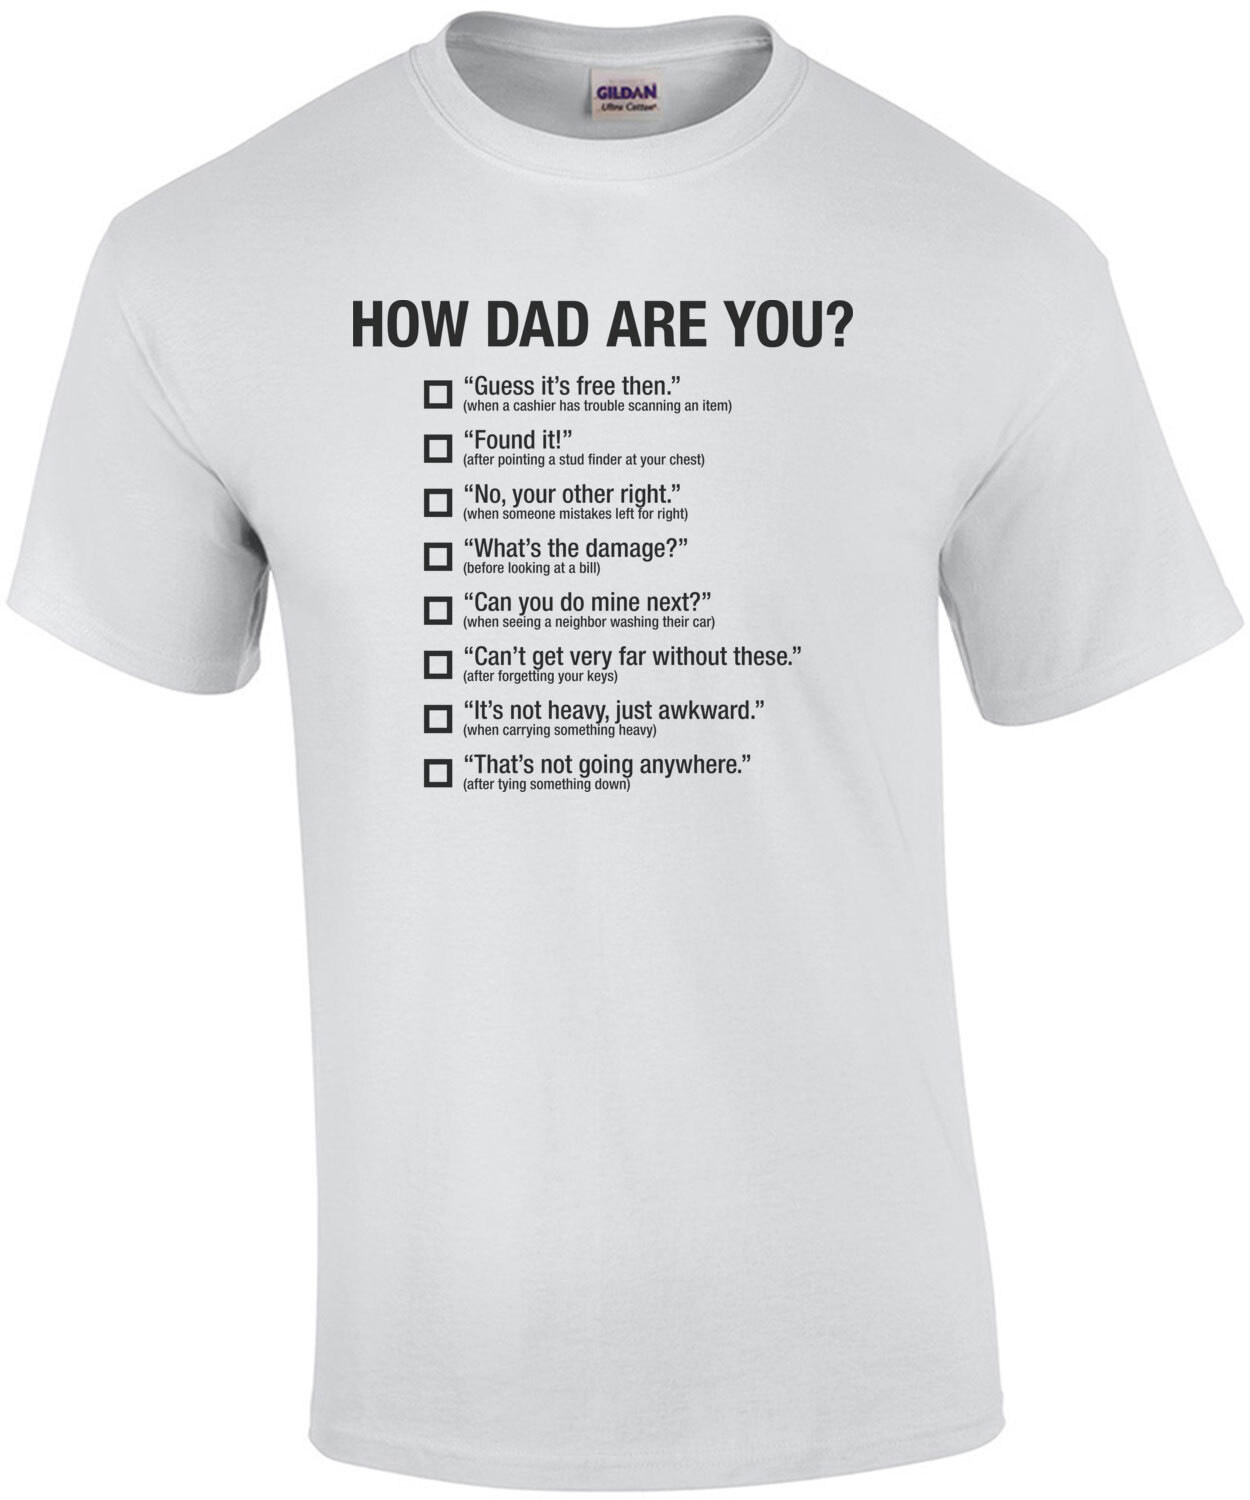 How Dad Are You? Shirt